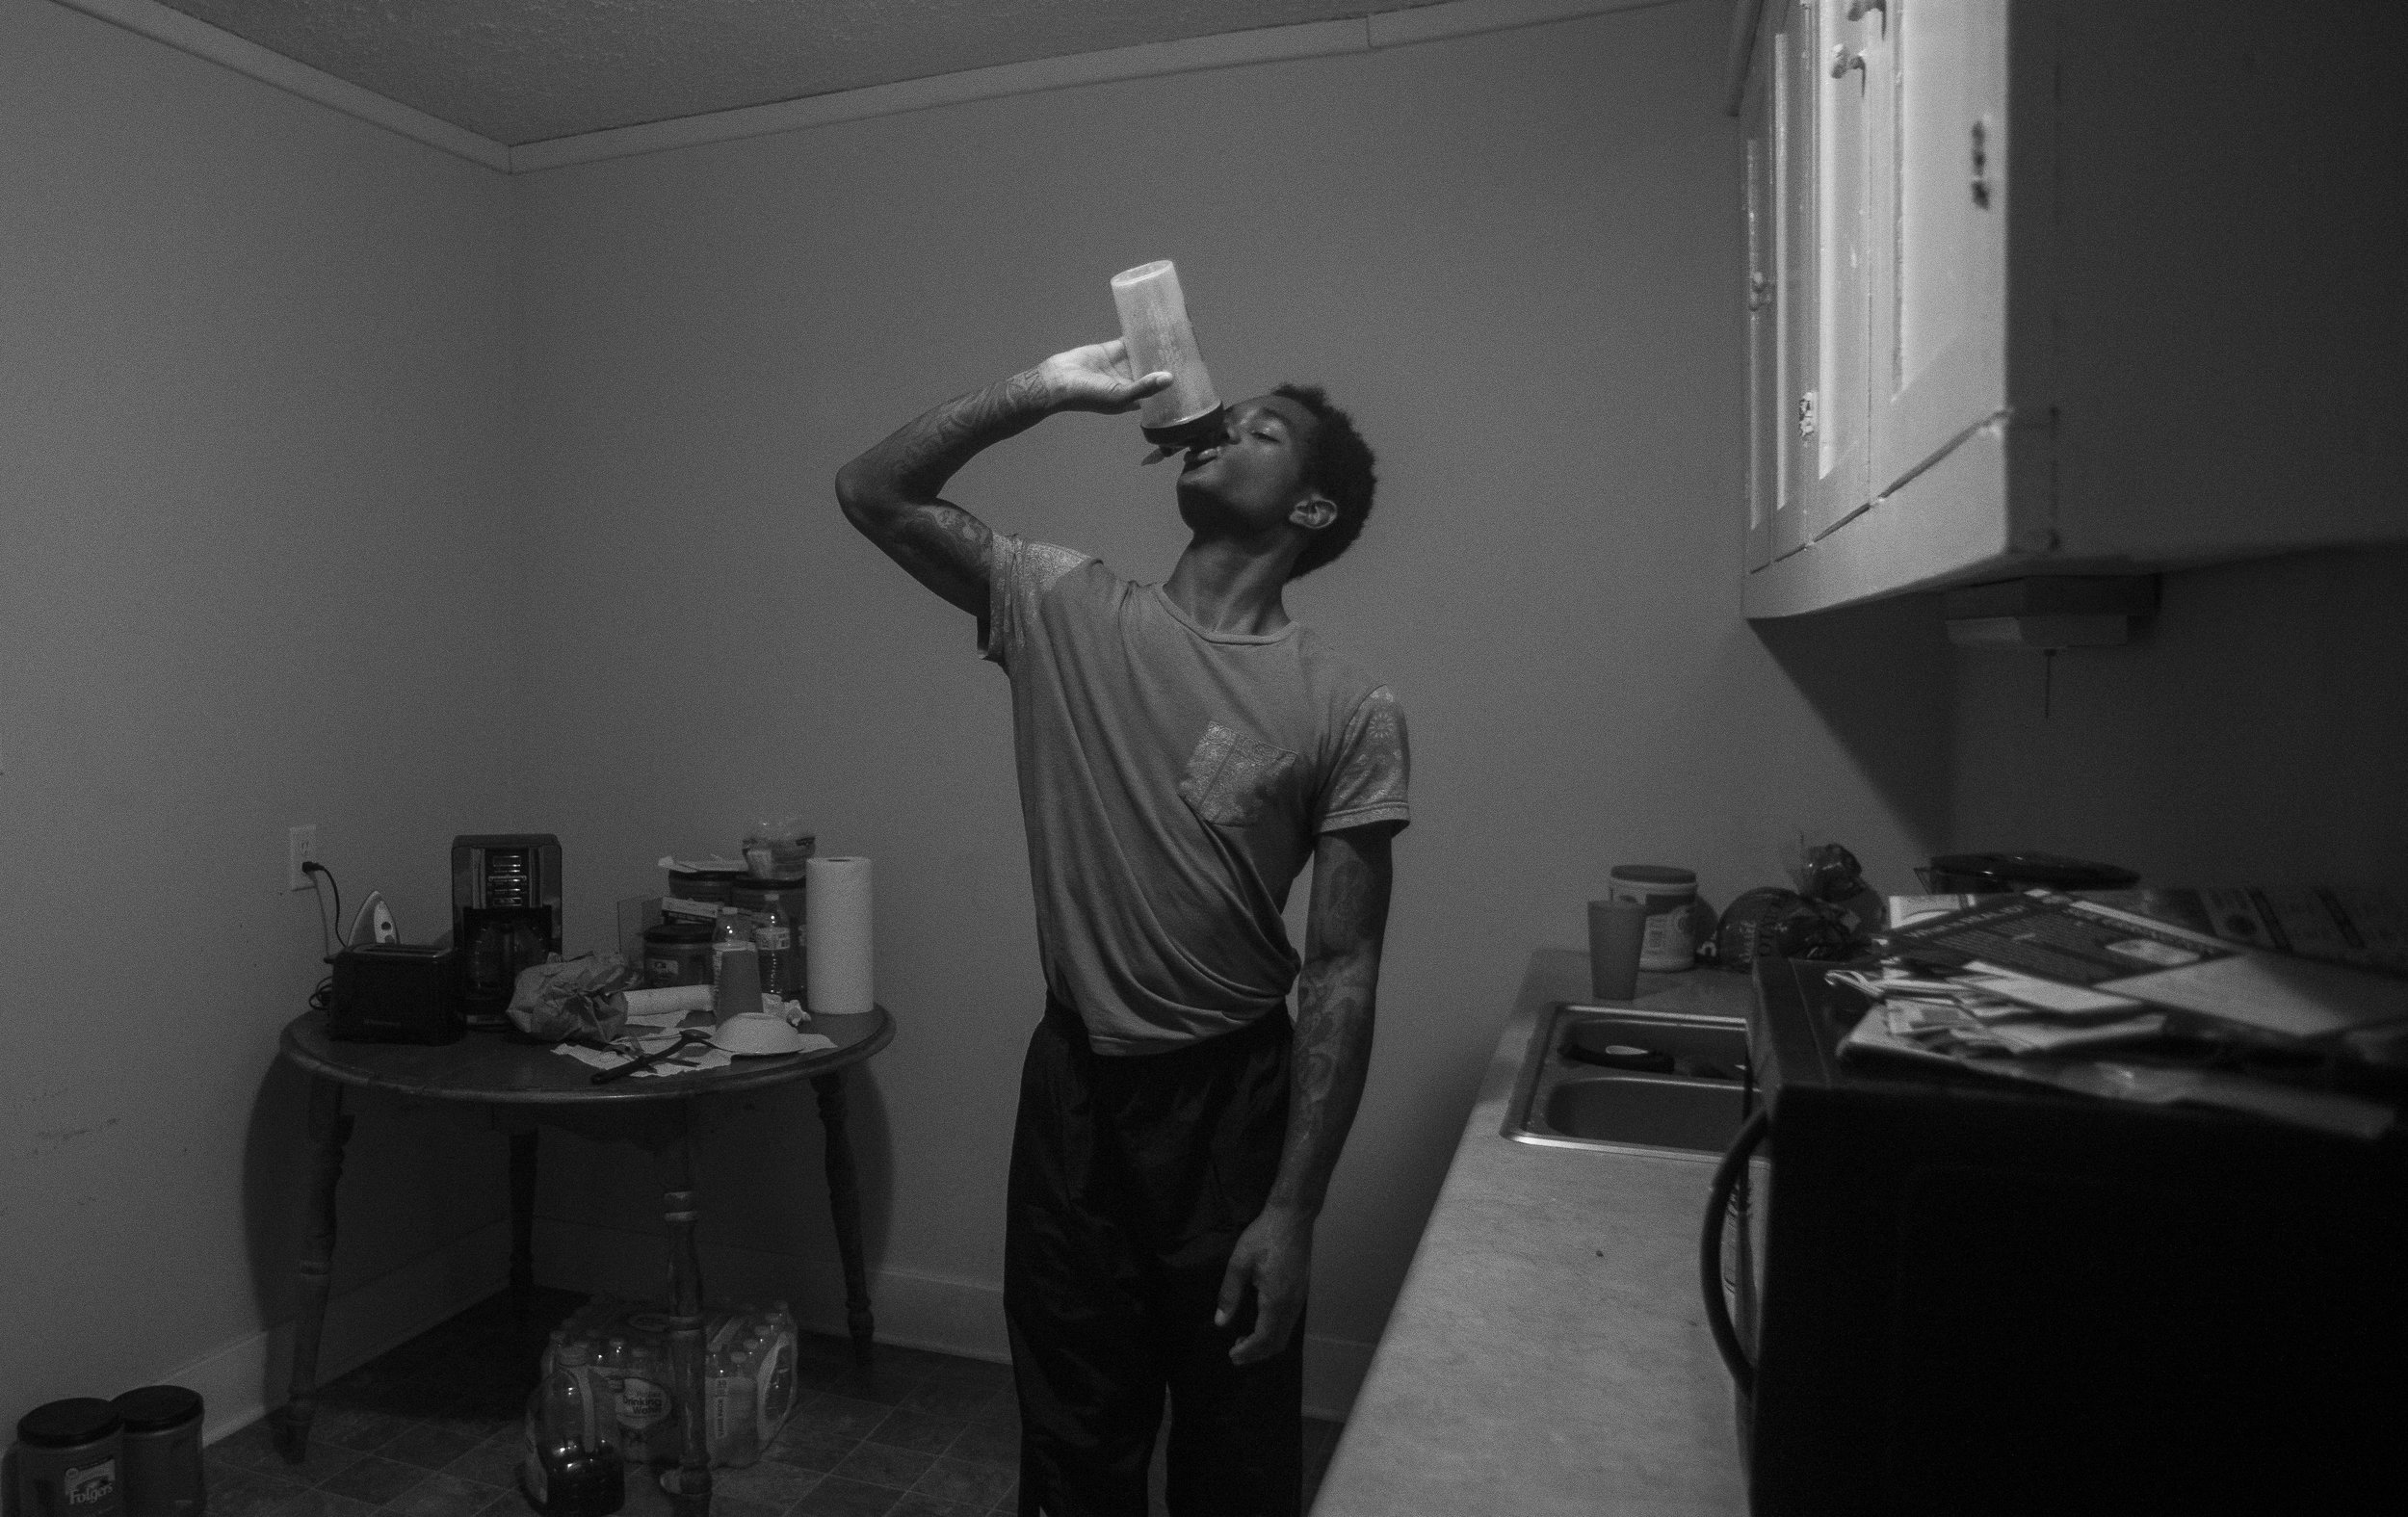  Spikes drinks a pre-workout drink in the kitchen of his home before going on a 6-mile run. He relaxes after his morning workout by eating 2 cups of oatmeal, a protein drink and watching an episode of “Gotham” or playing video games.  